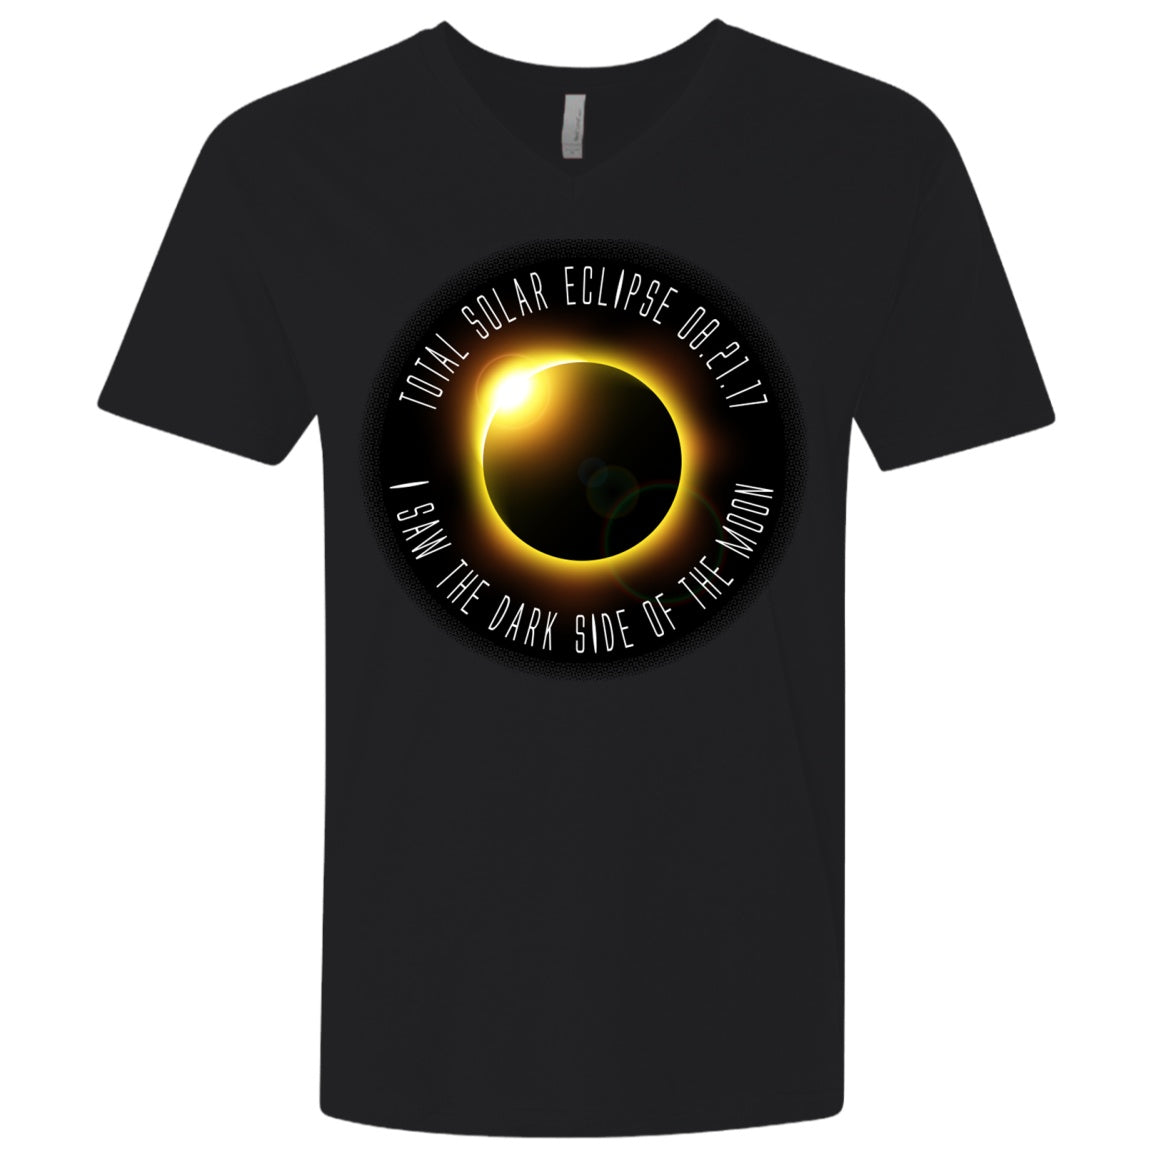 Total Solar Eclipse 2017 Shirts for Men Women - I Saw The Dark Side Of The Moon - GoneBold.gift